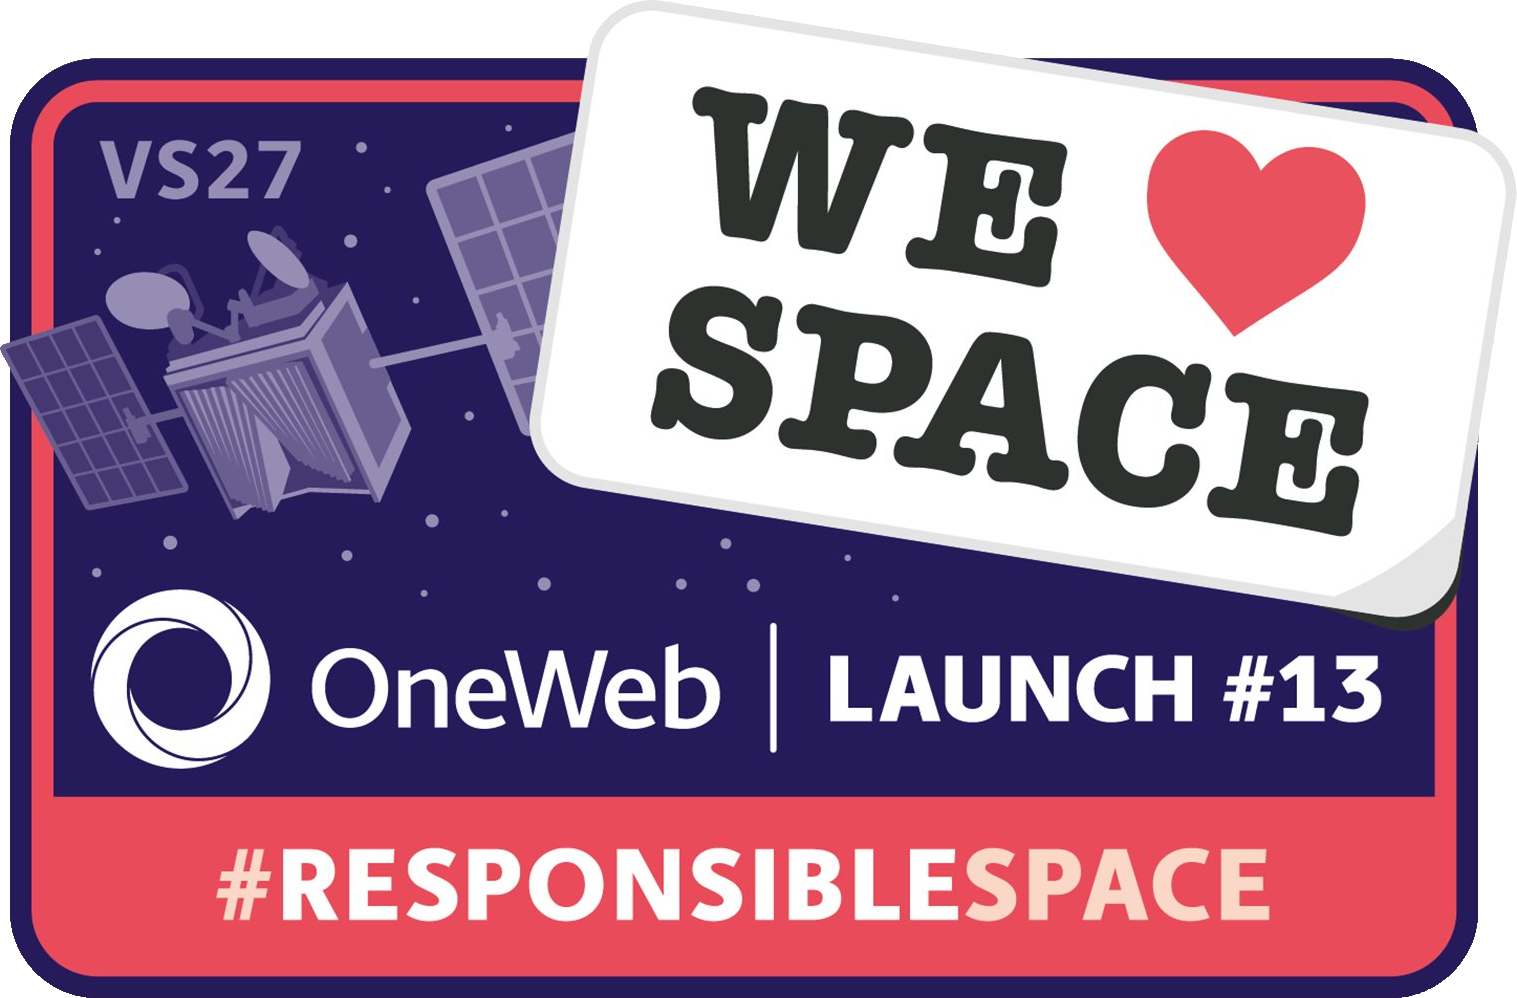 Mission patch for OneWeb 13